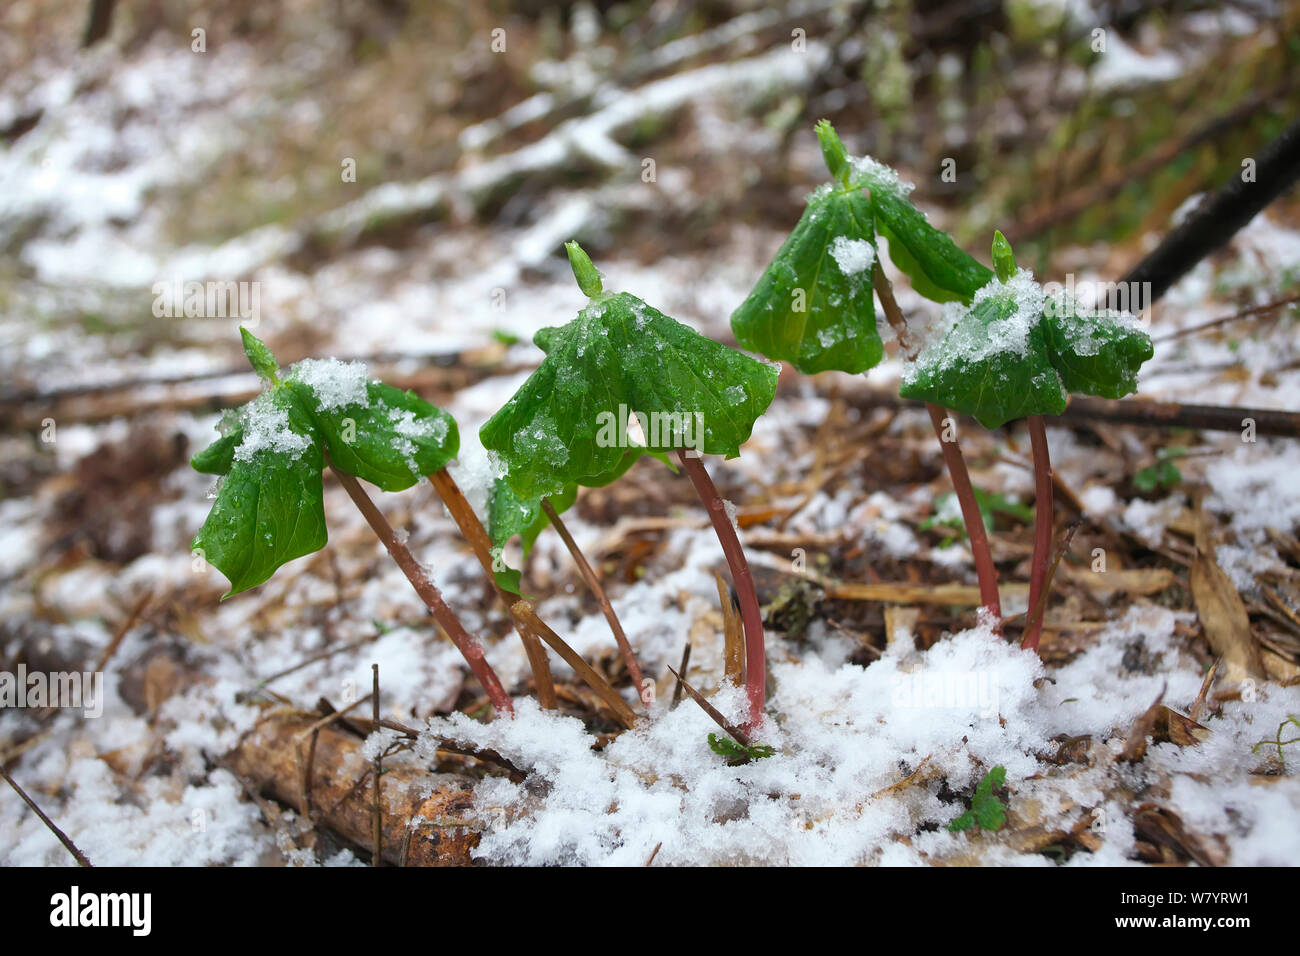 Trillium plants (Trillium tschonoskii) with buds on forest floor with snow, Lijiang City, Lijiang Laojunshan National Park, Yunnan Province, China. April. Stock Photo